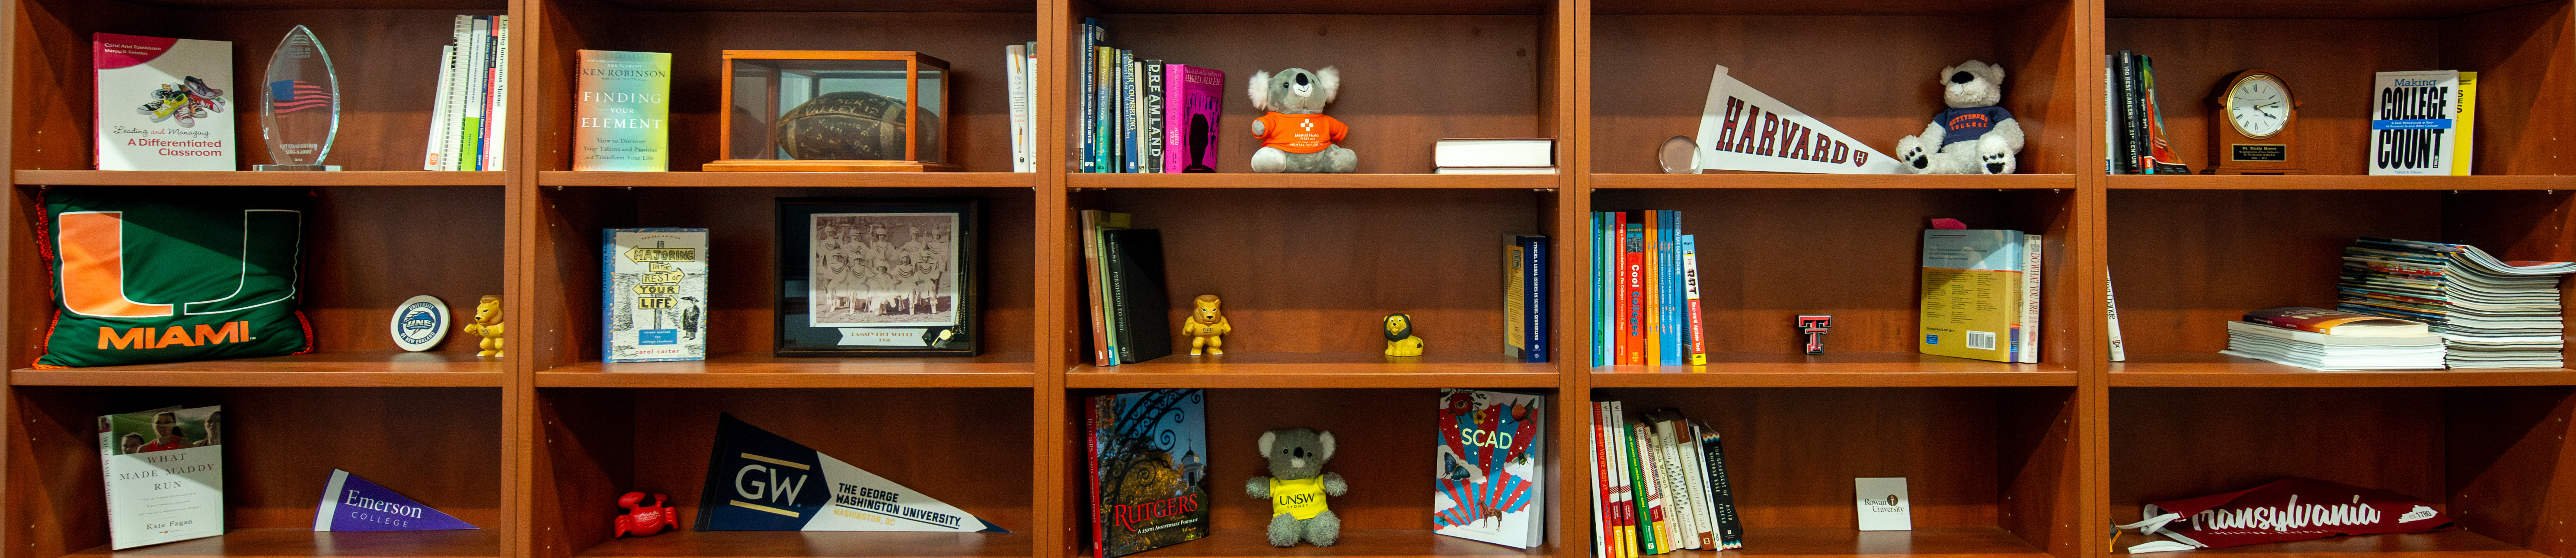 Picture of bookshelves with college images